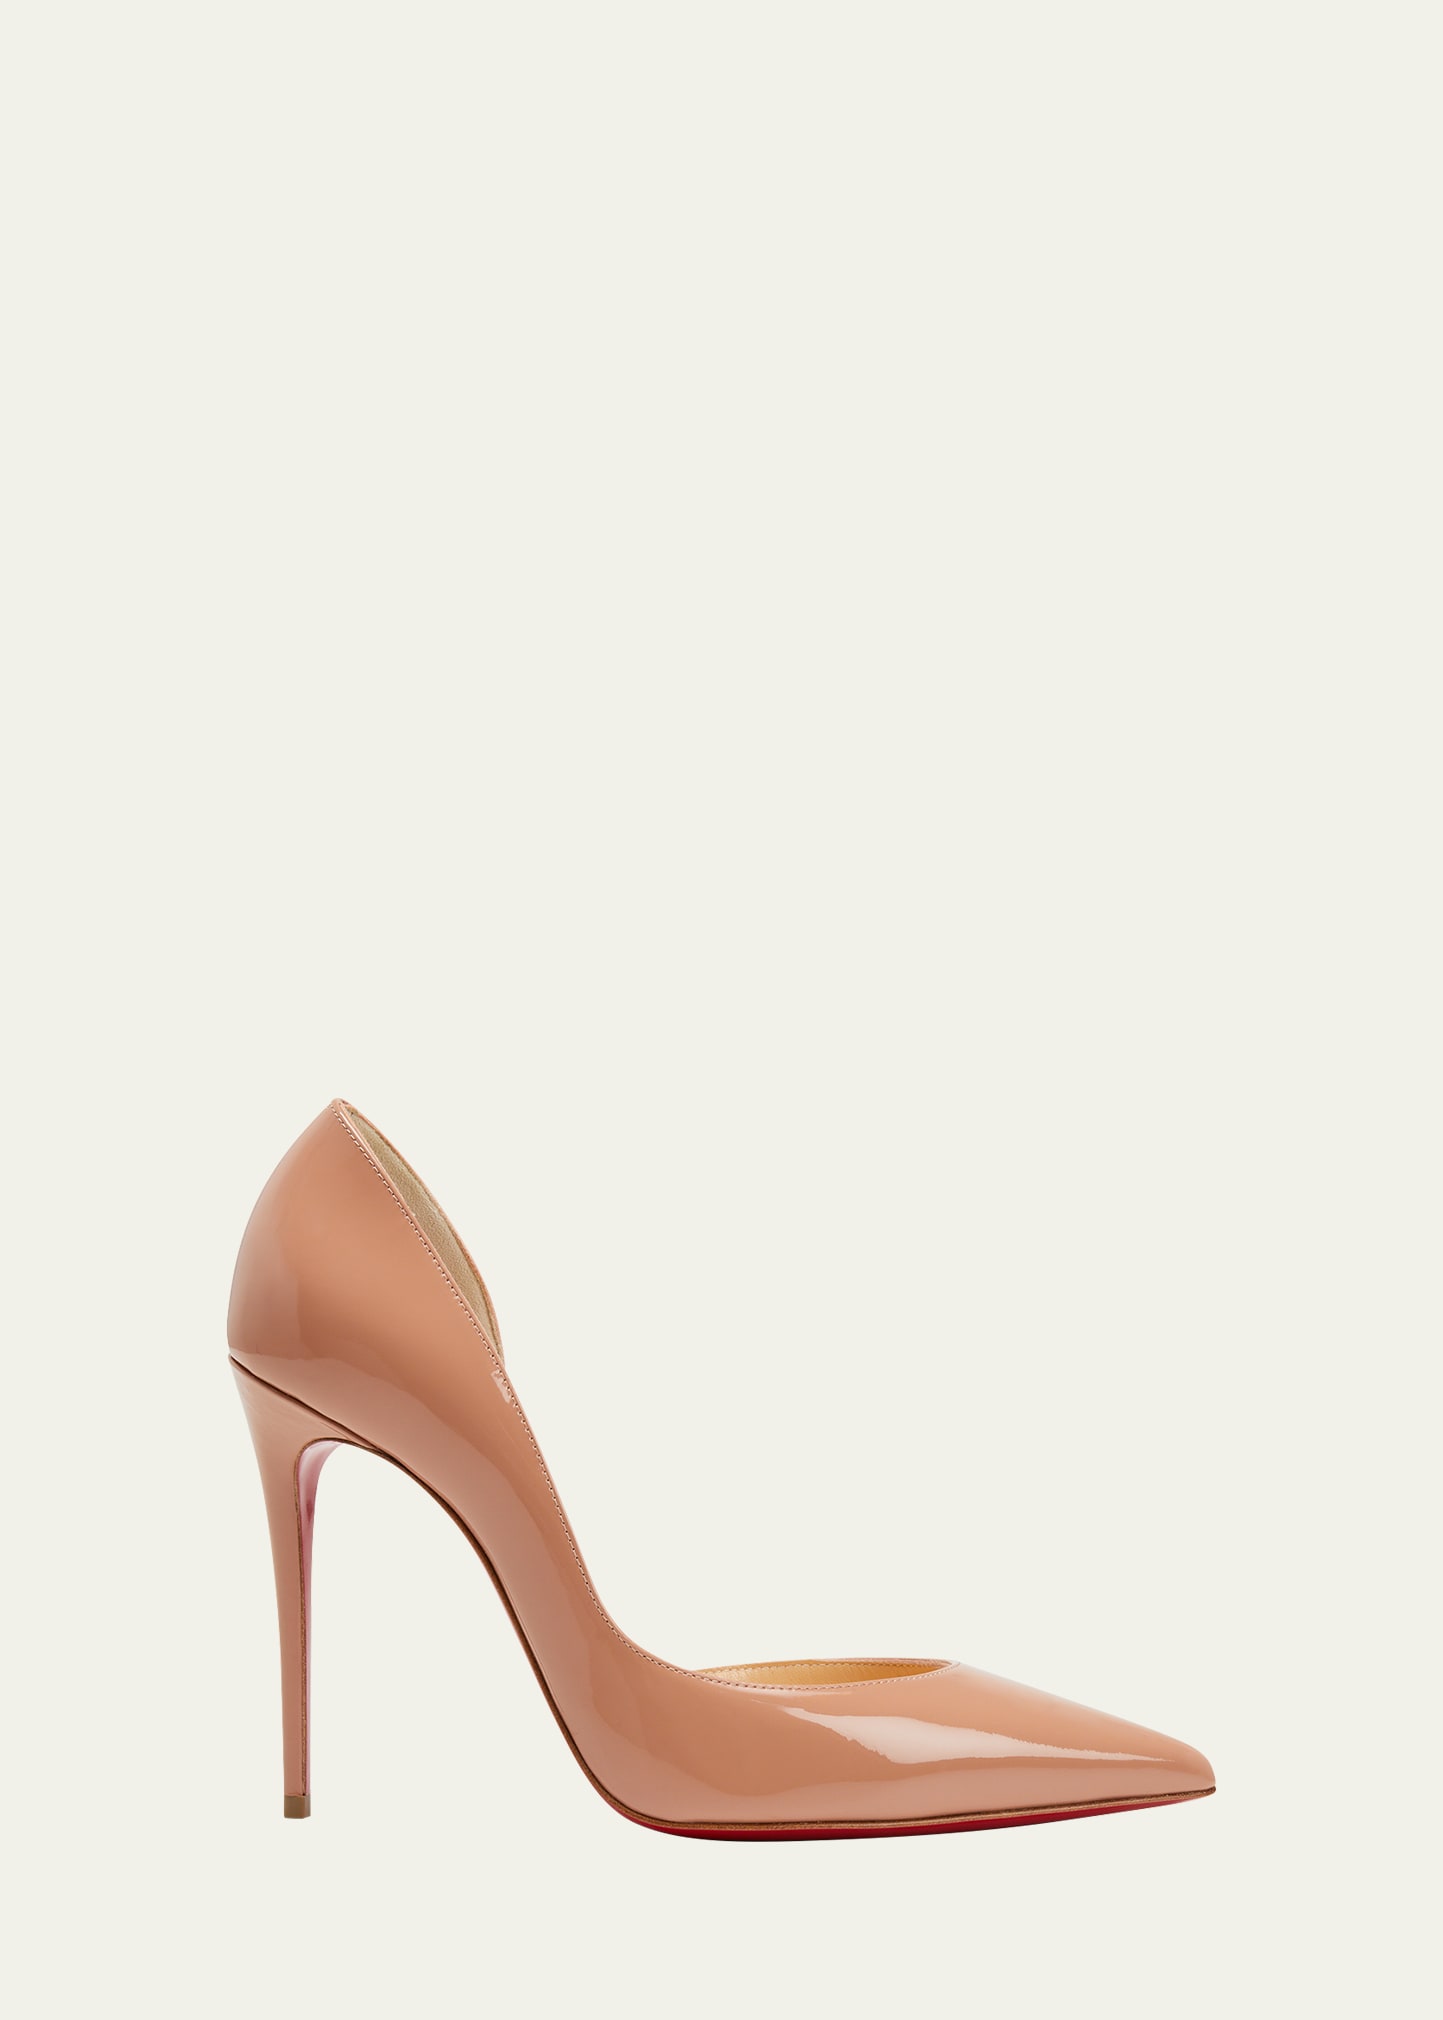 Christian Louboutin Iriza Patent 100mm Half-d'orsay Red Sole High-heel Pumps In Blush